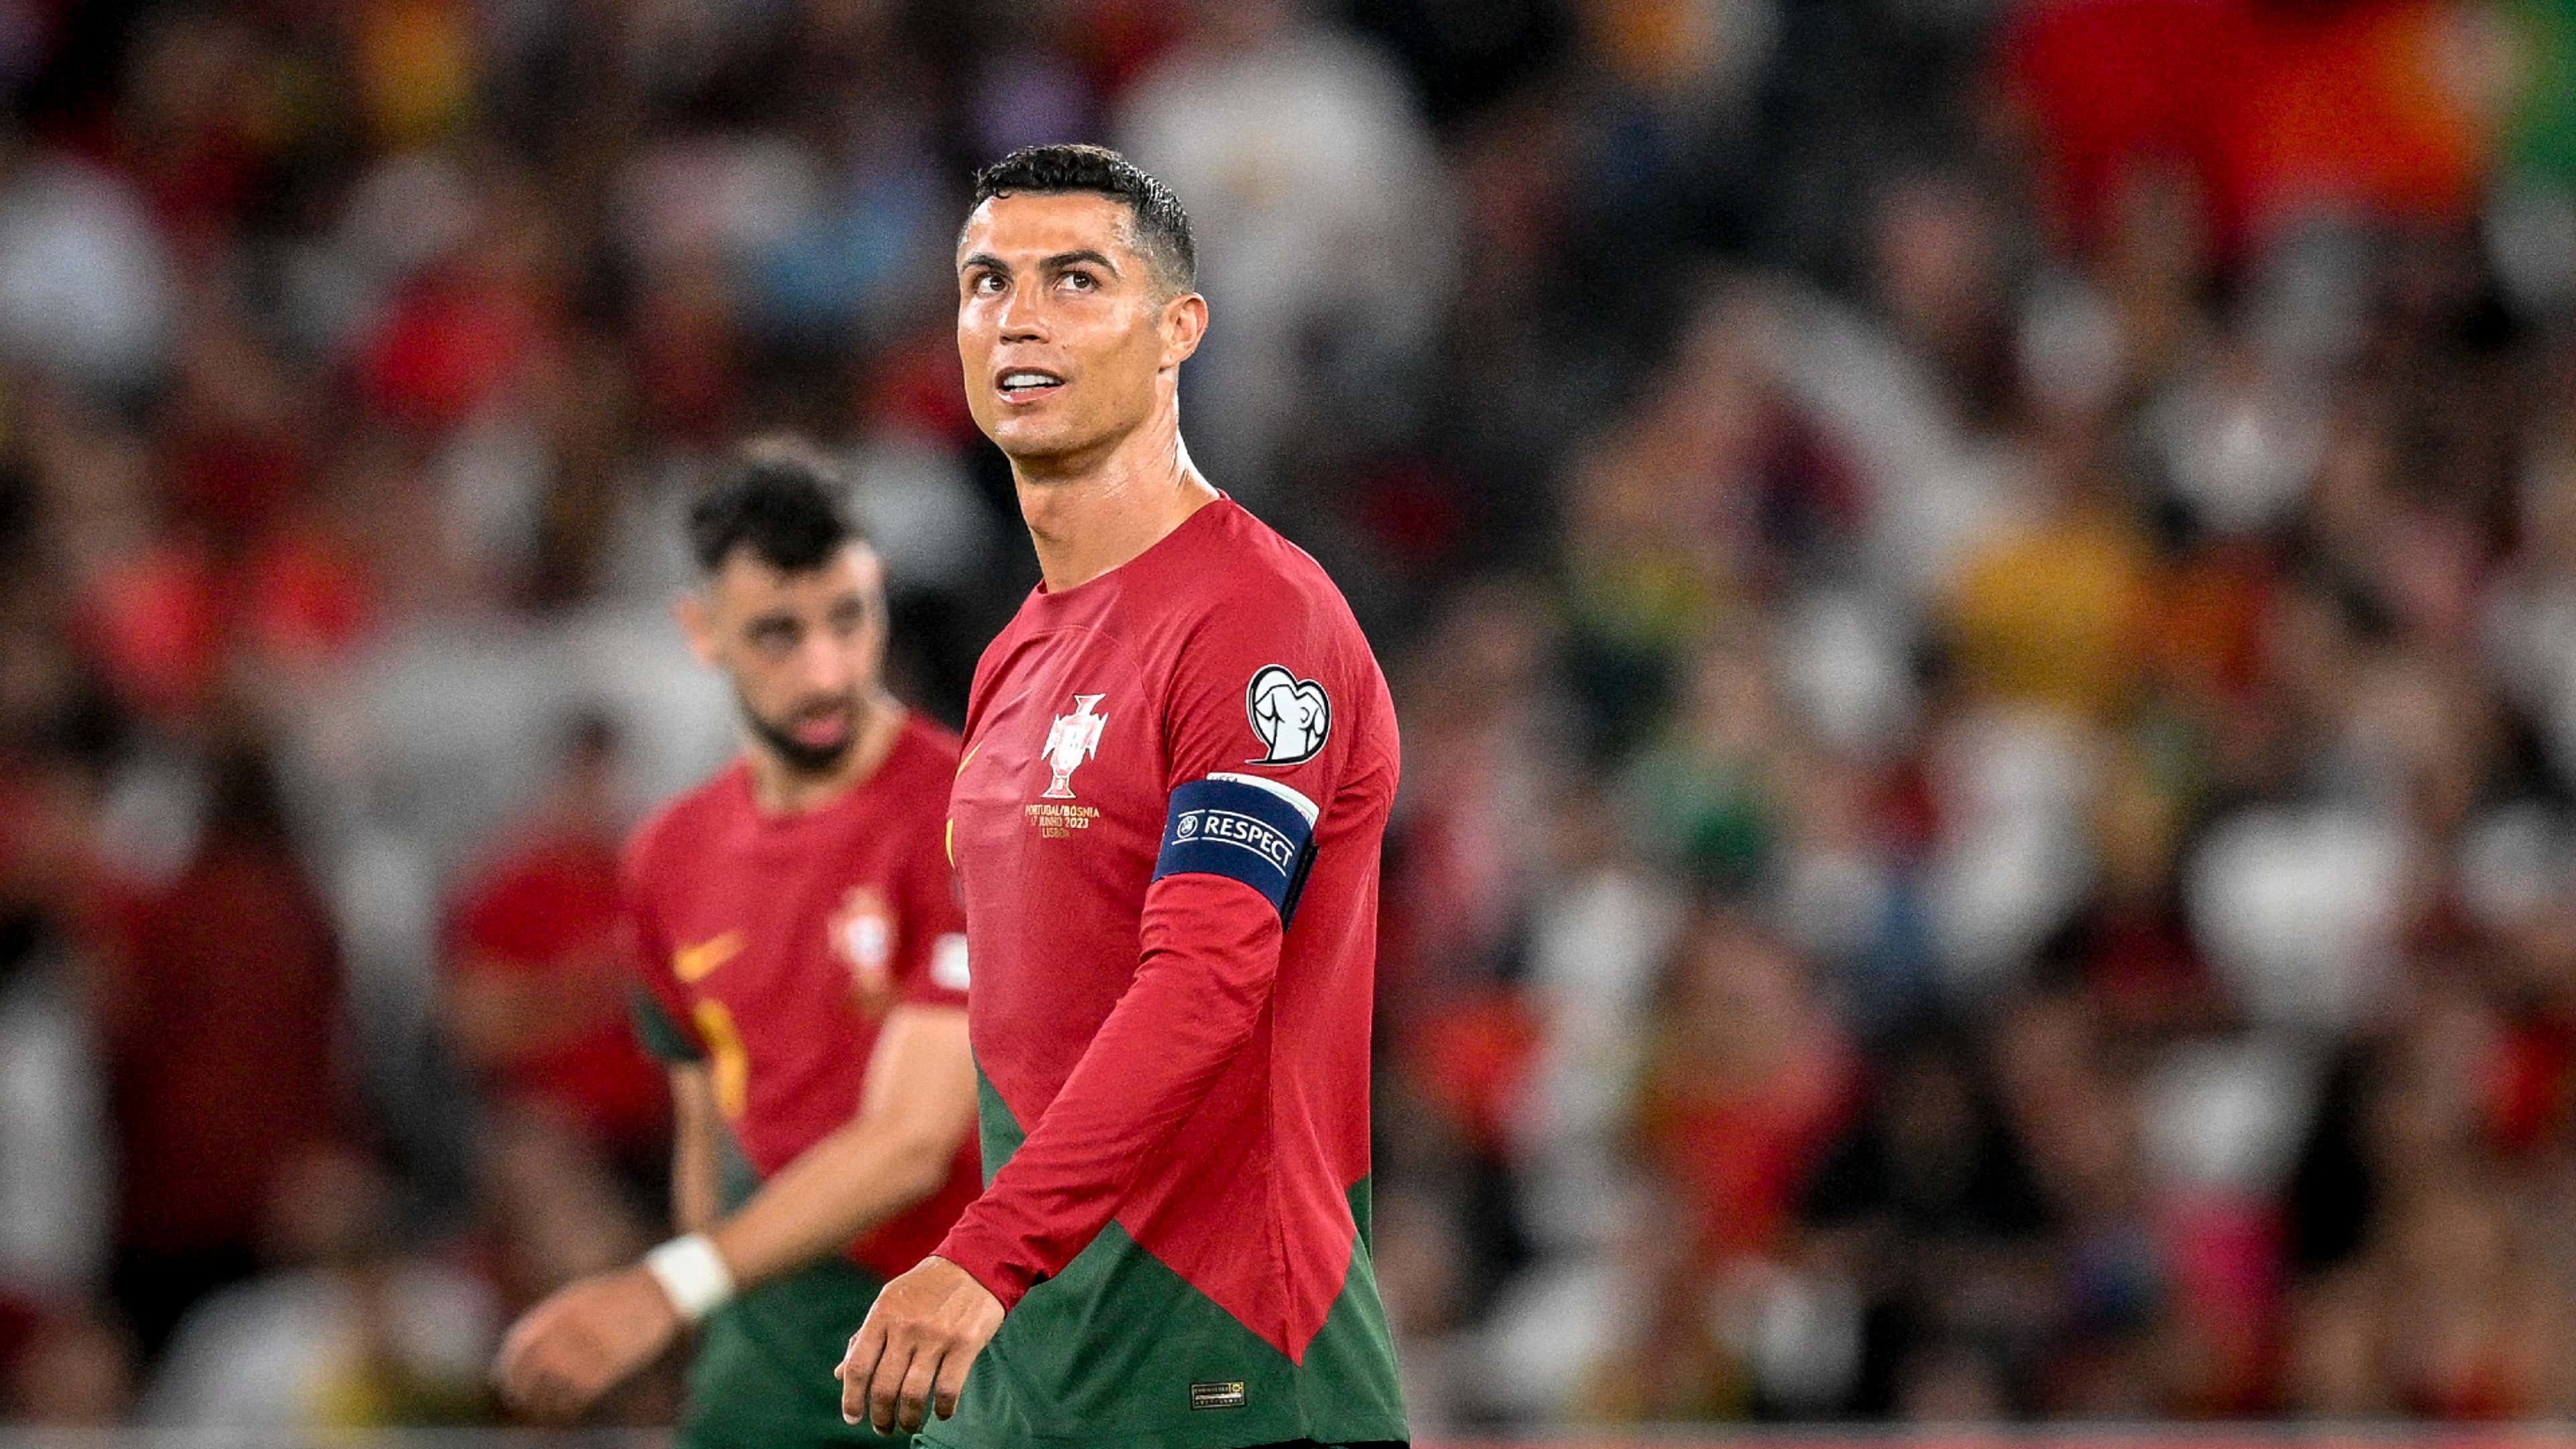 Cristiano Ronaldo returns to Al-Nassr early after Portugal suspension - but  Goncalo Ramos praises CR7 for providing 'great support' in dressing room |  Goal.com